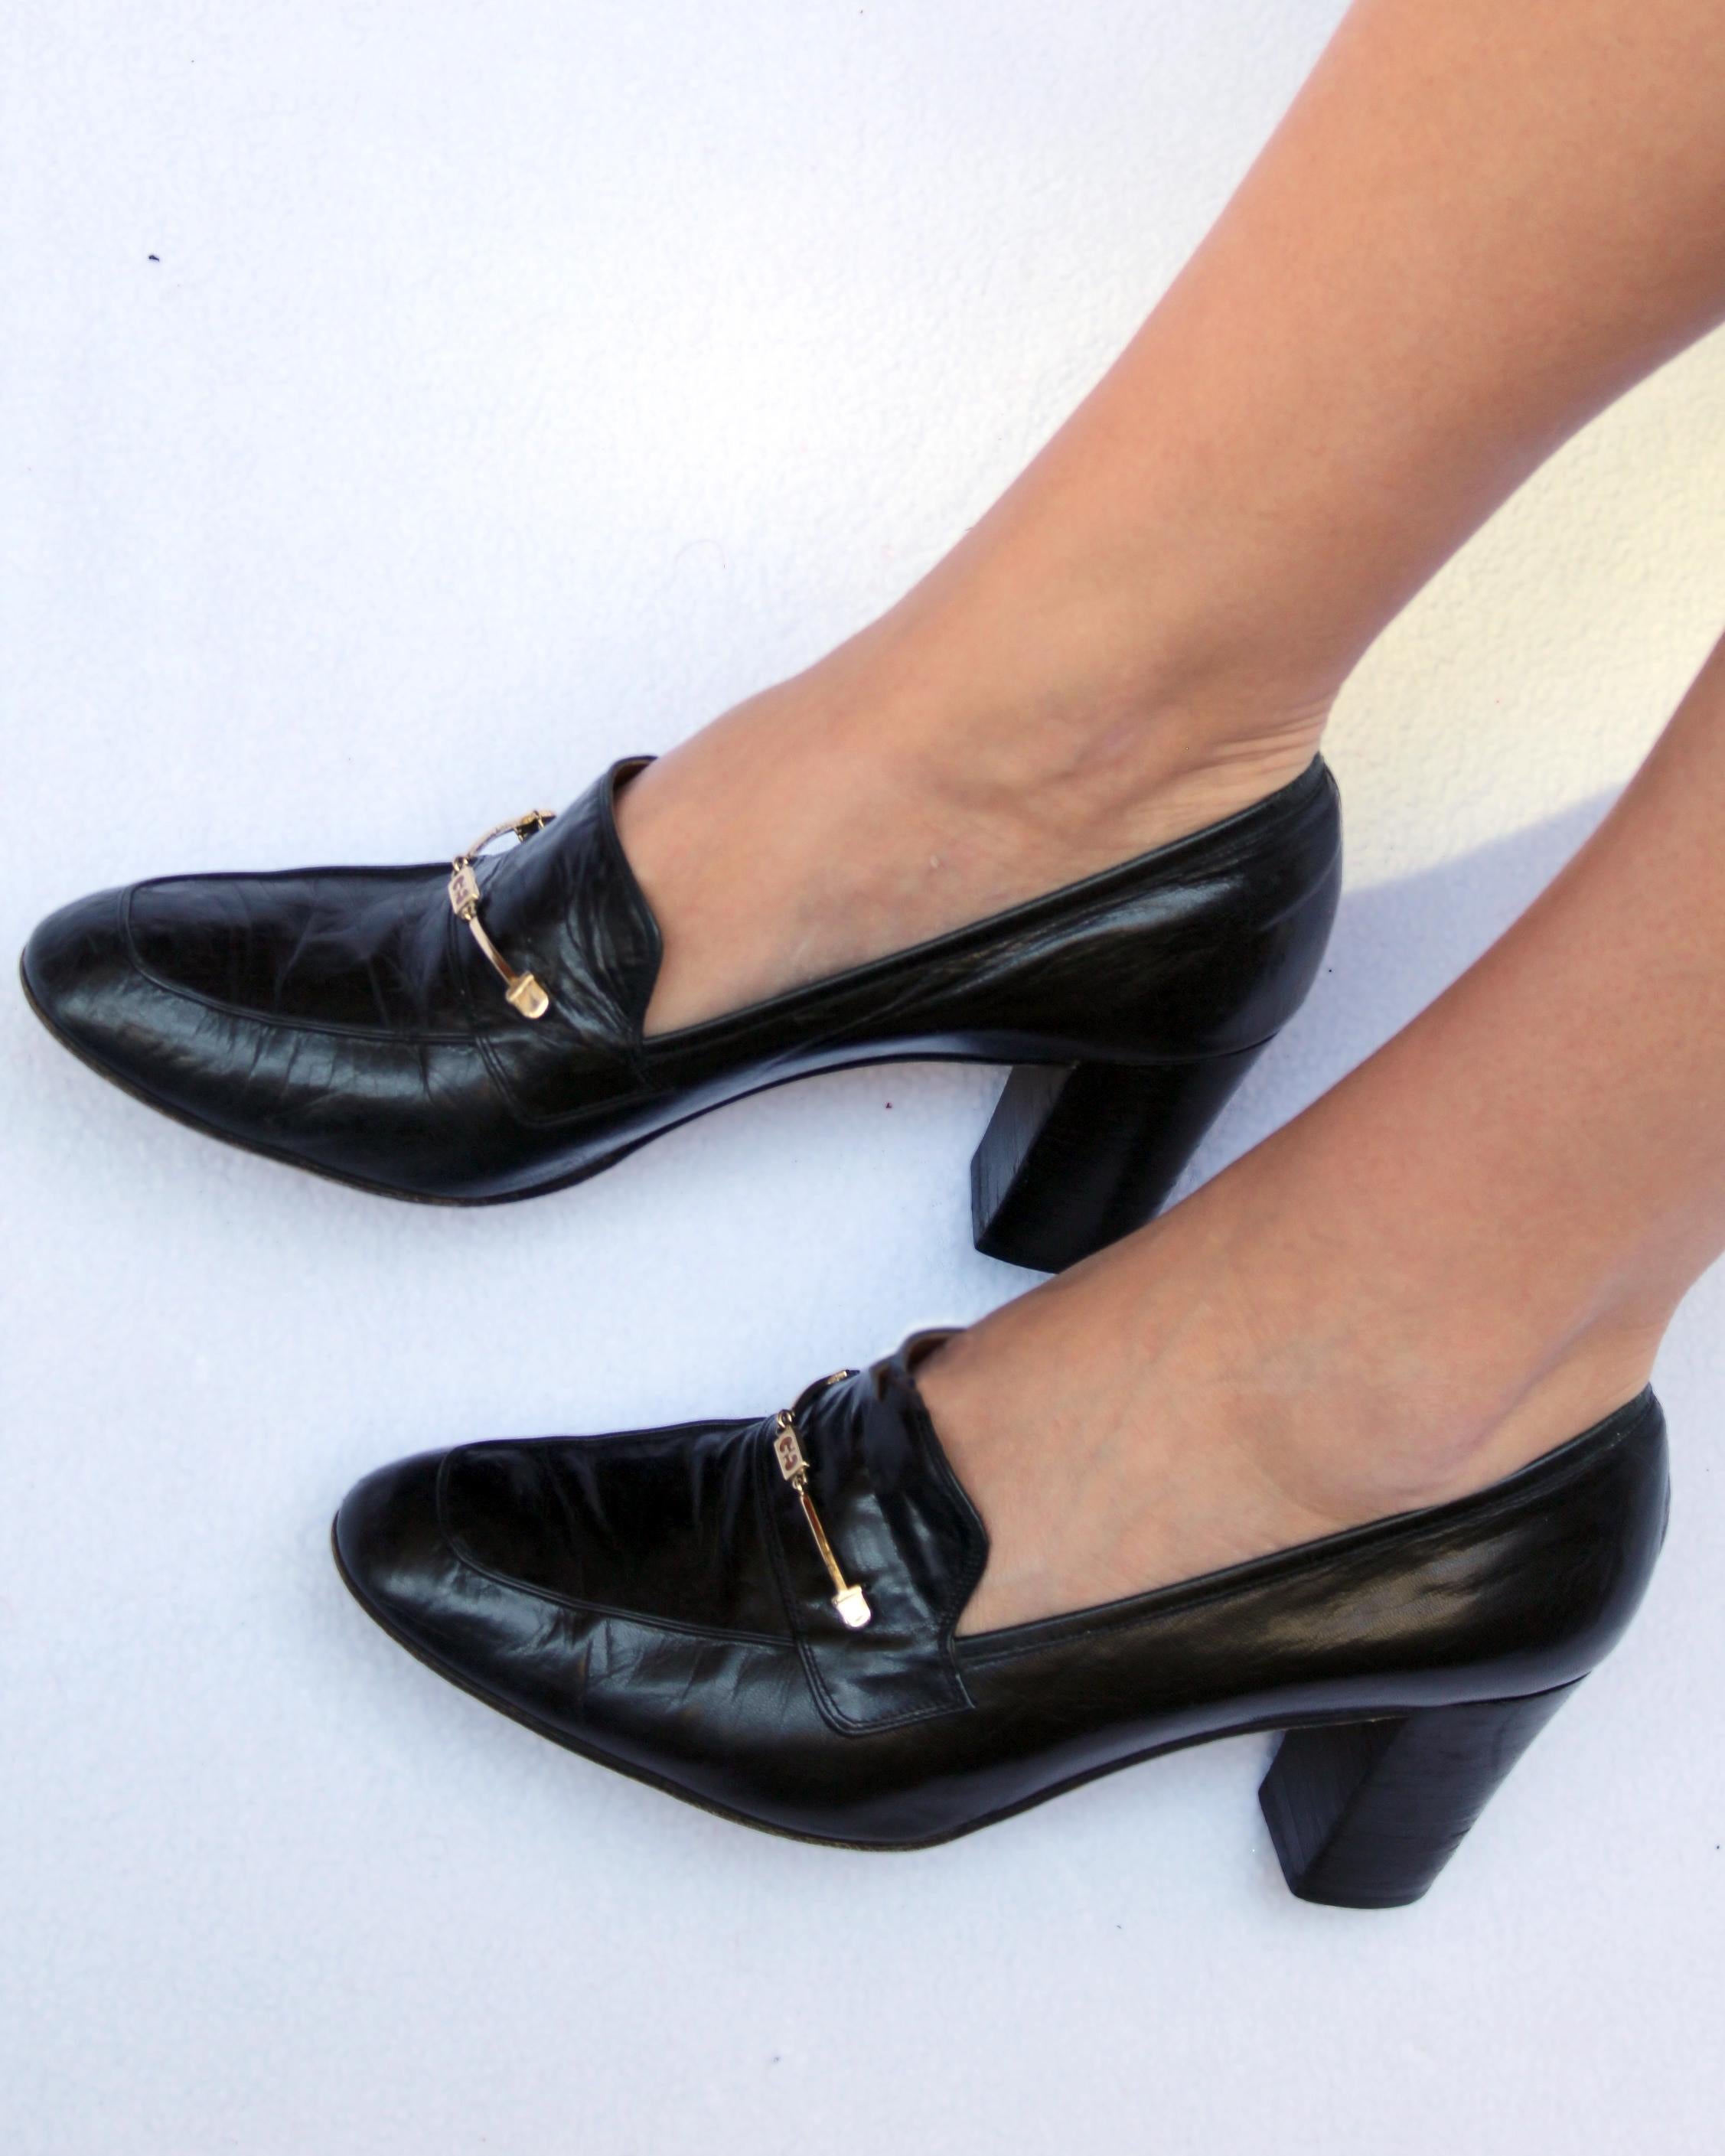 These iconic vintage 1970s Gucci heeled loafers are so timeless, featuring the classic Gucci horsebit detail debossed with the GG logo. They are a soft black color, crafted in Italy of the most butter-soft leather— they've been broken in for you, so